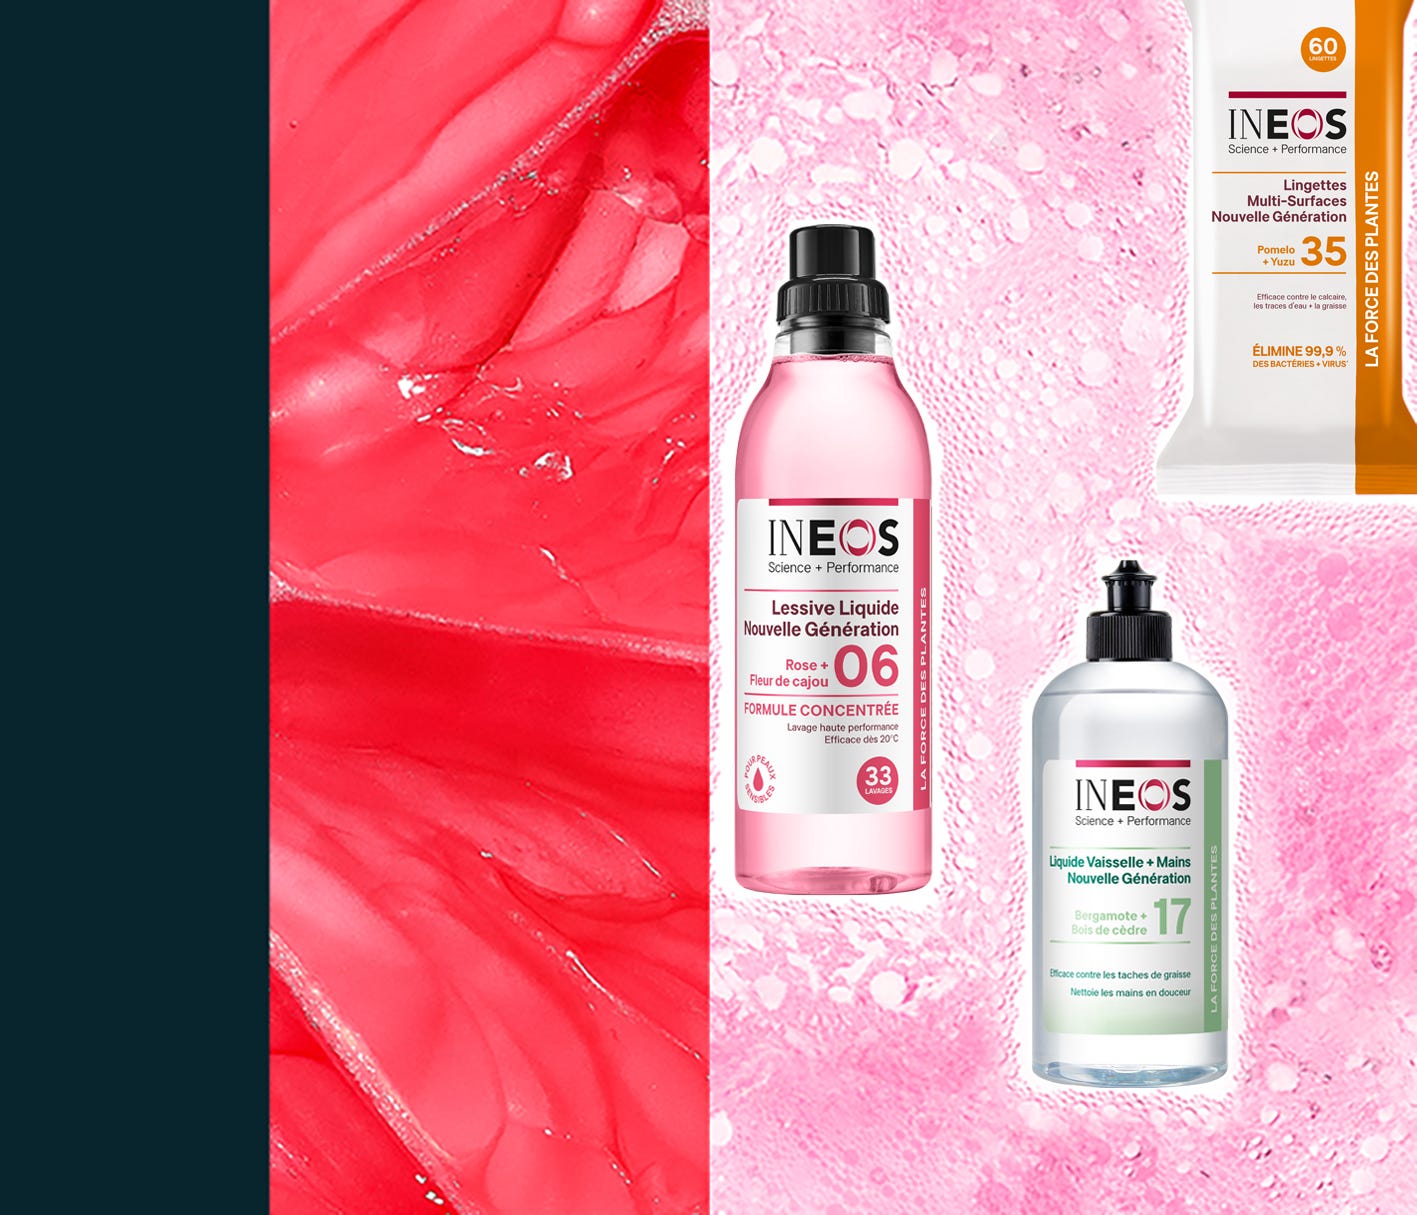 a banner for the ineos hygienics website featuring their top french products